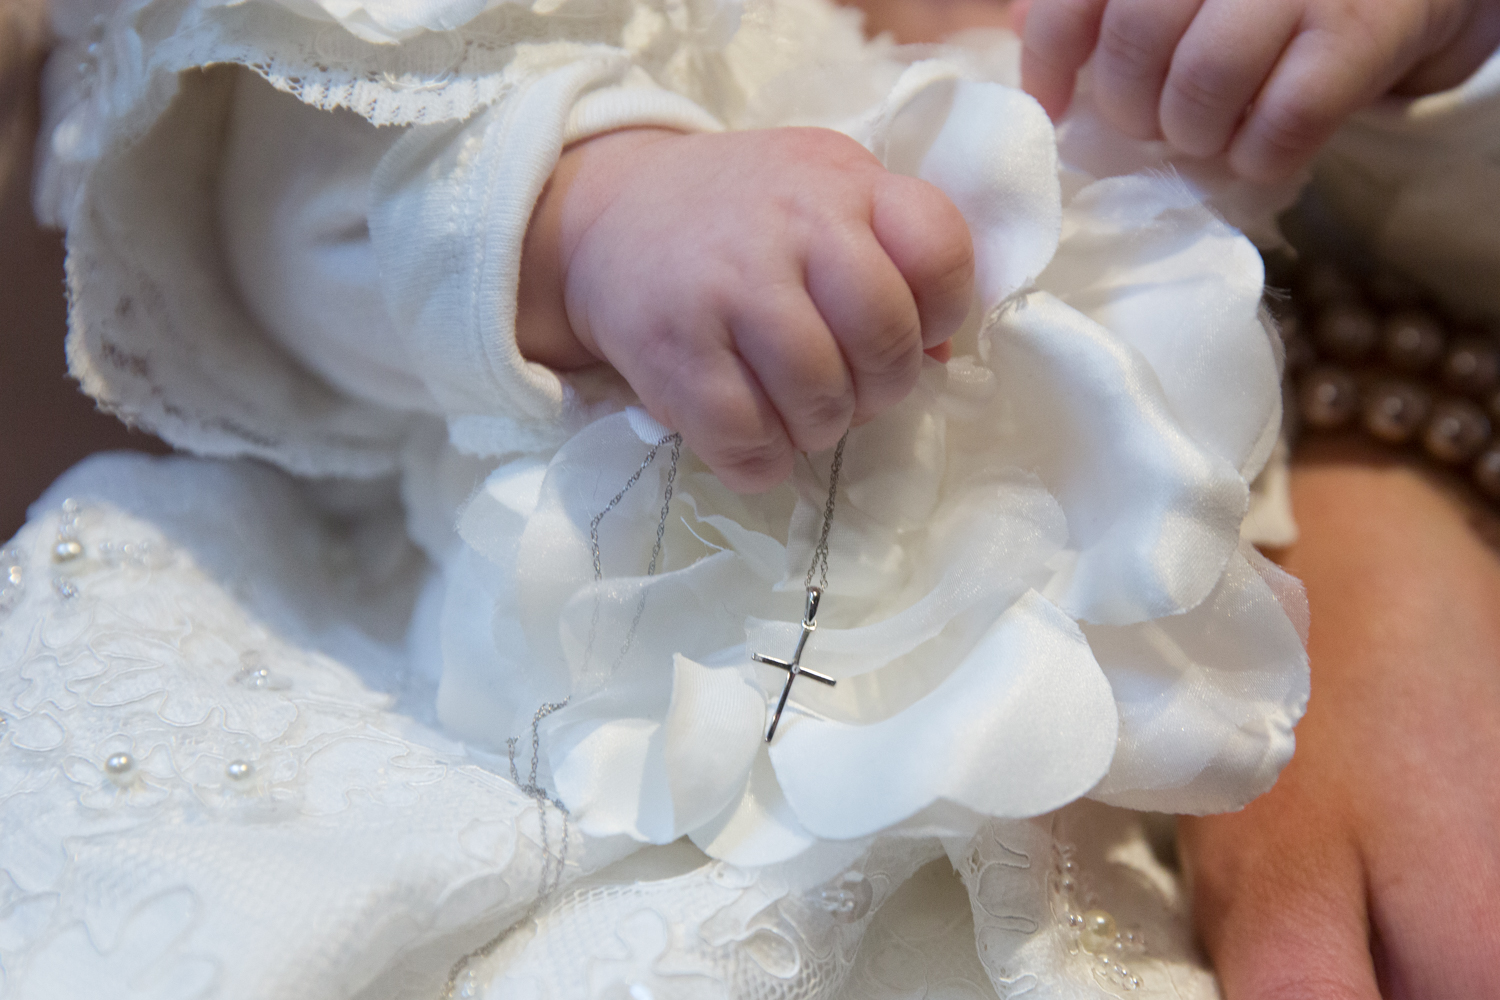 christening-queens-NYC-2016-photograohy-153.jpg